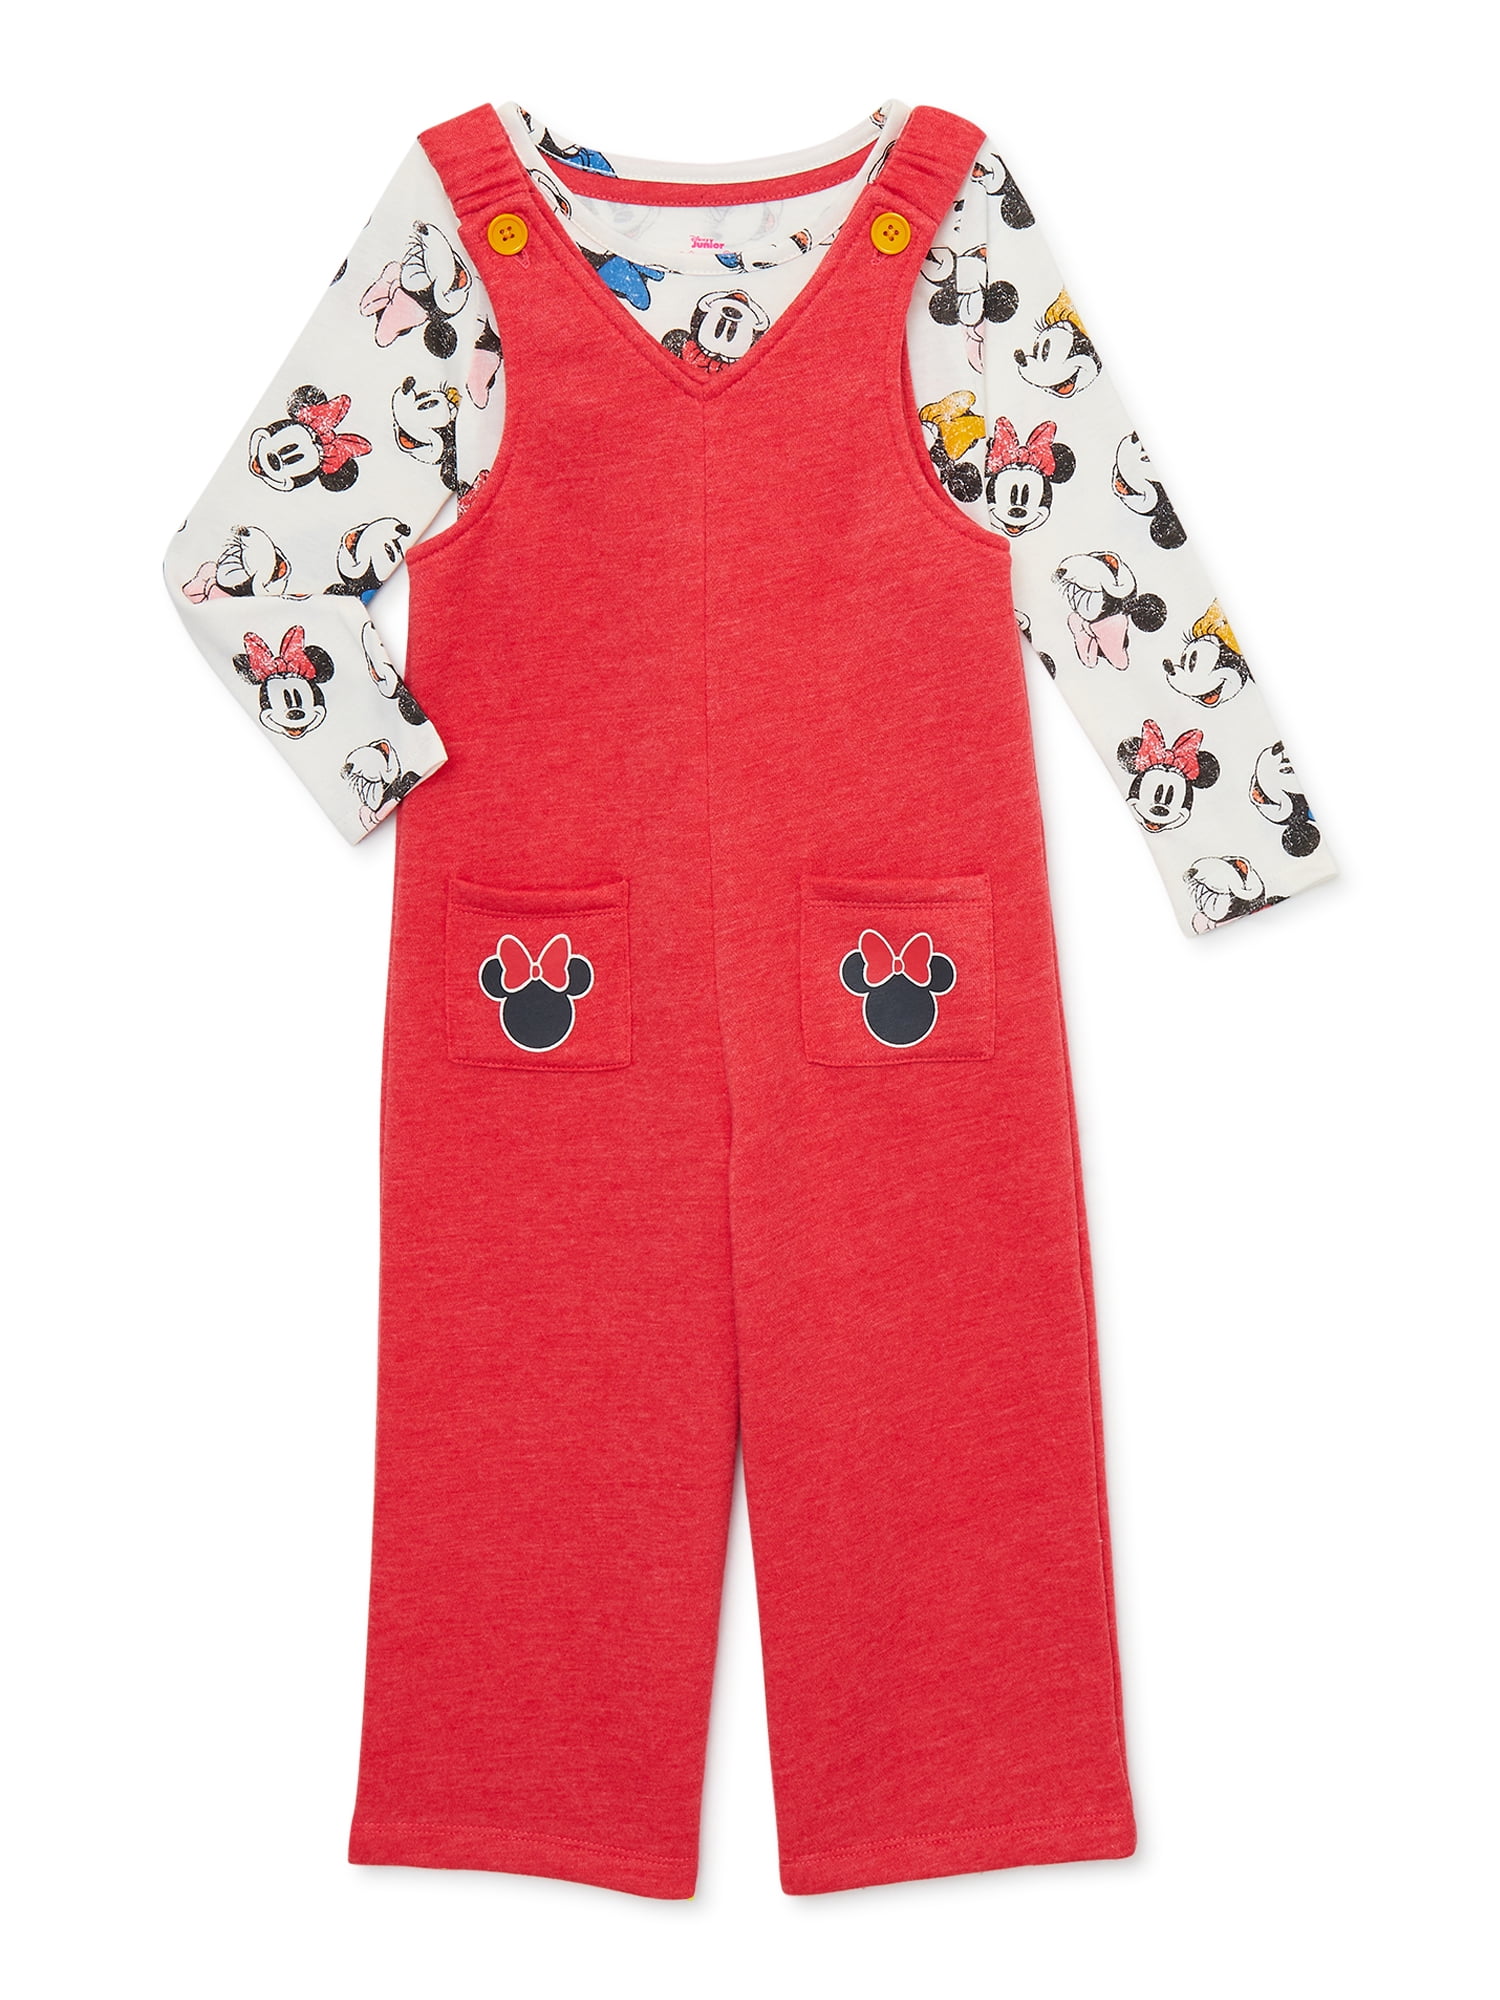 Minnie Mouse Baby and Toddler Girls Long Sleeve Tee and Romper, 2 Piece Outfit Set, Sizes 12M-5T